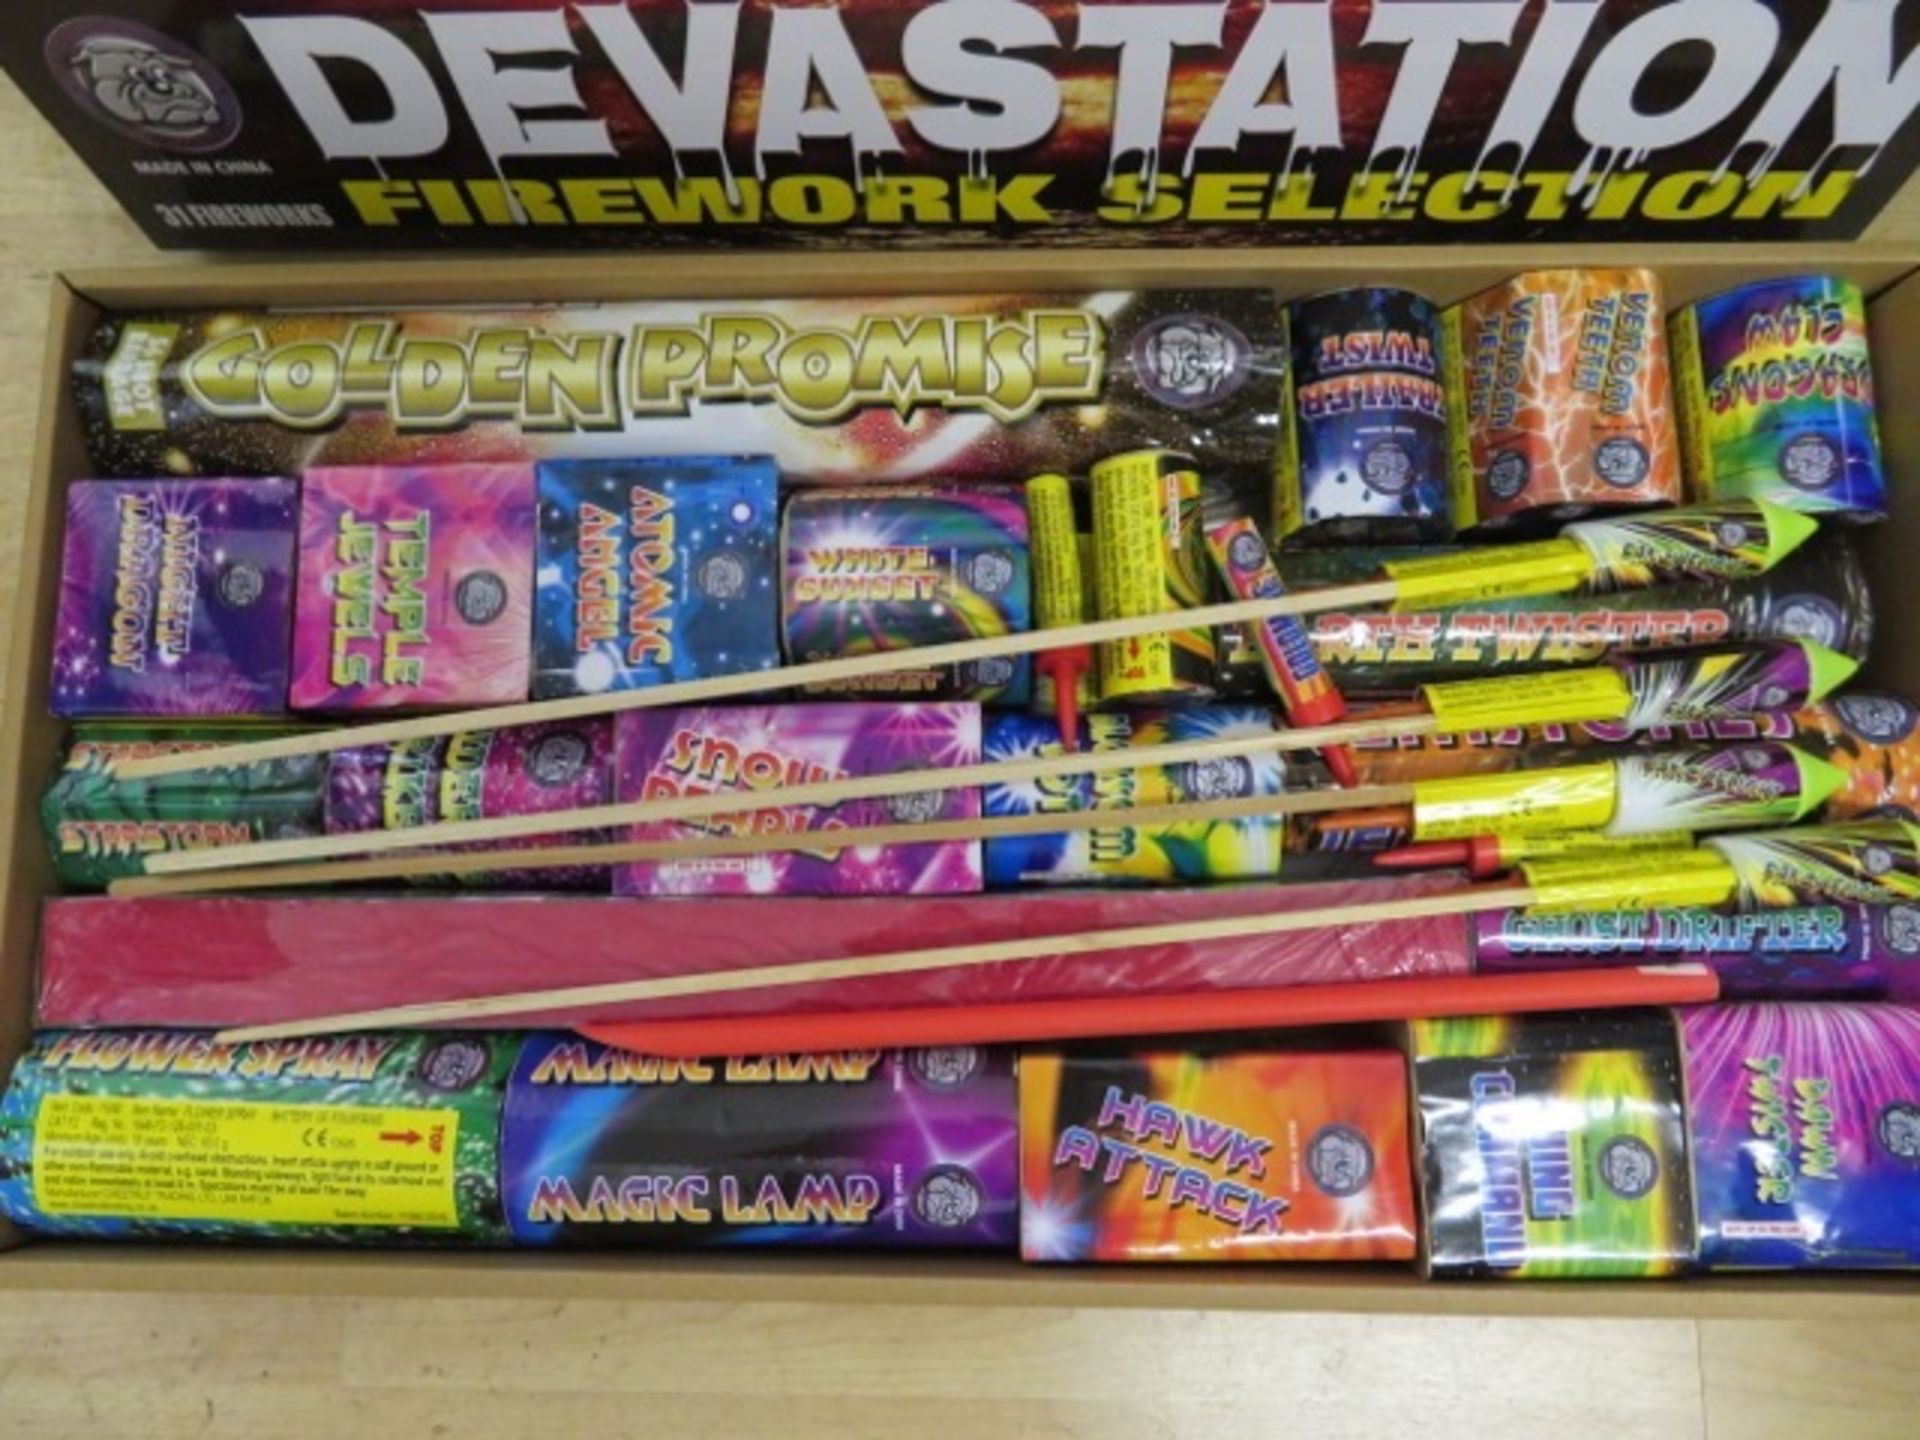 TRADE LOT 3 x 31 PIECE DEVASTATION FIREWORK SELECTION BOX. RRP £199.99 each, giving this lot a total